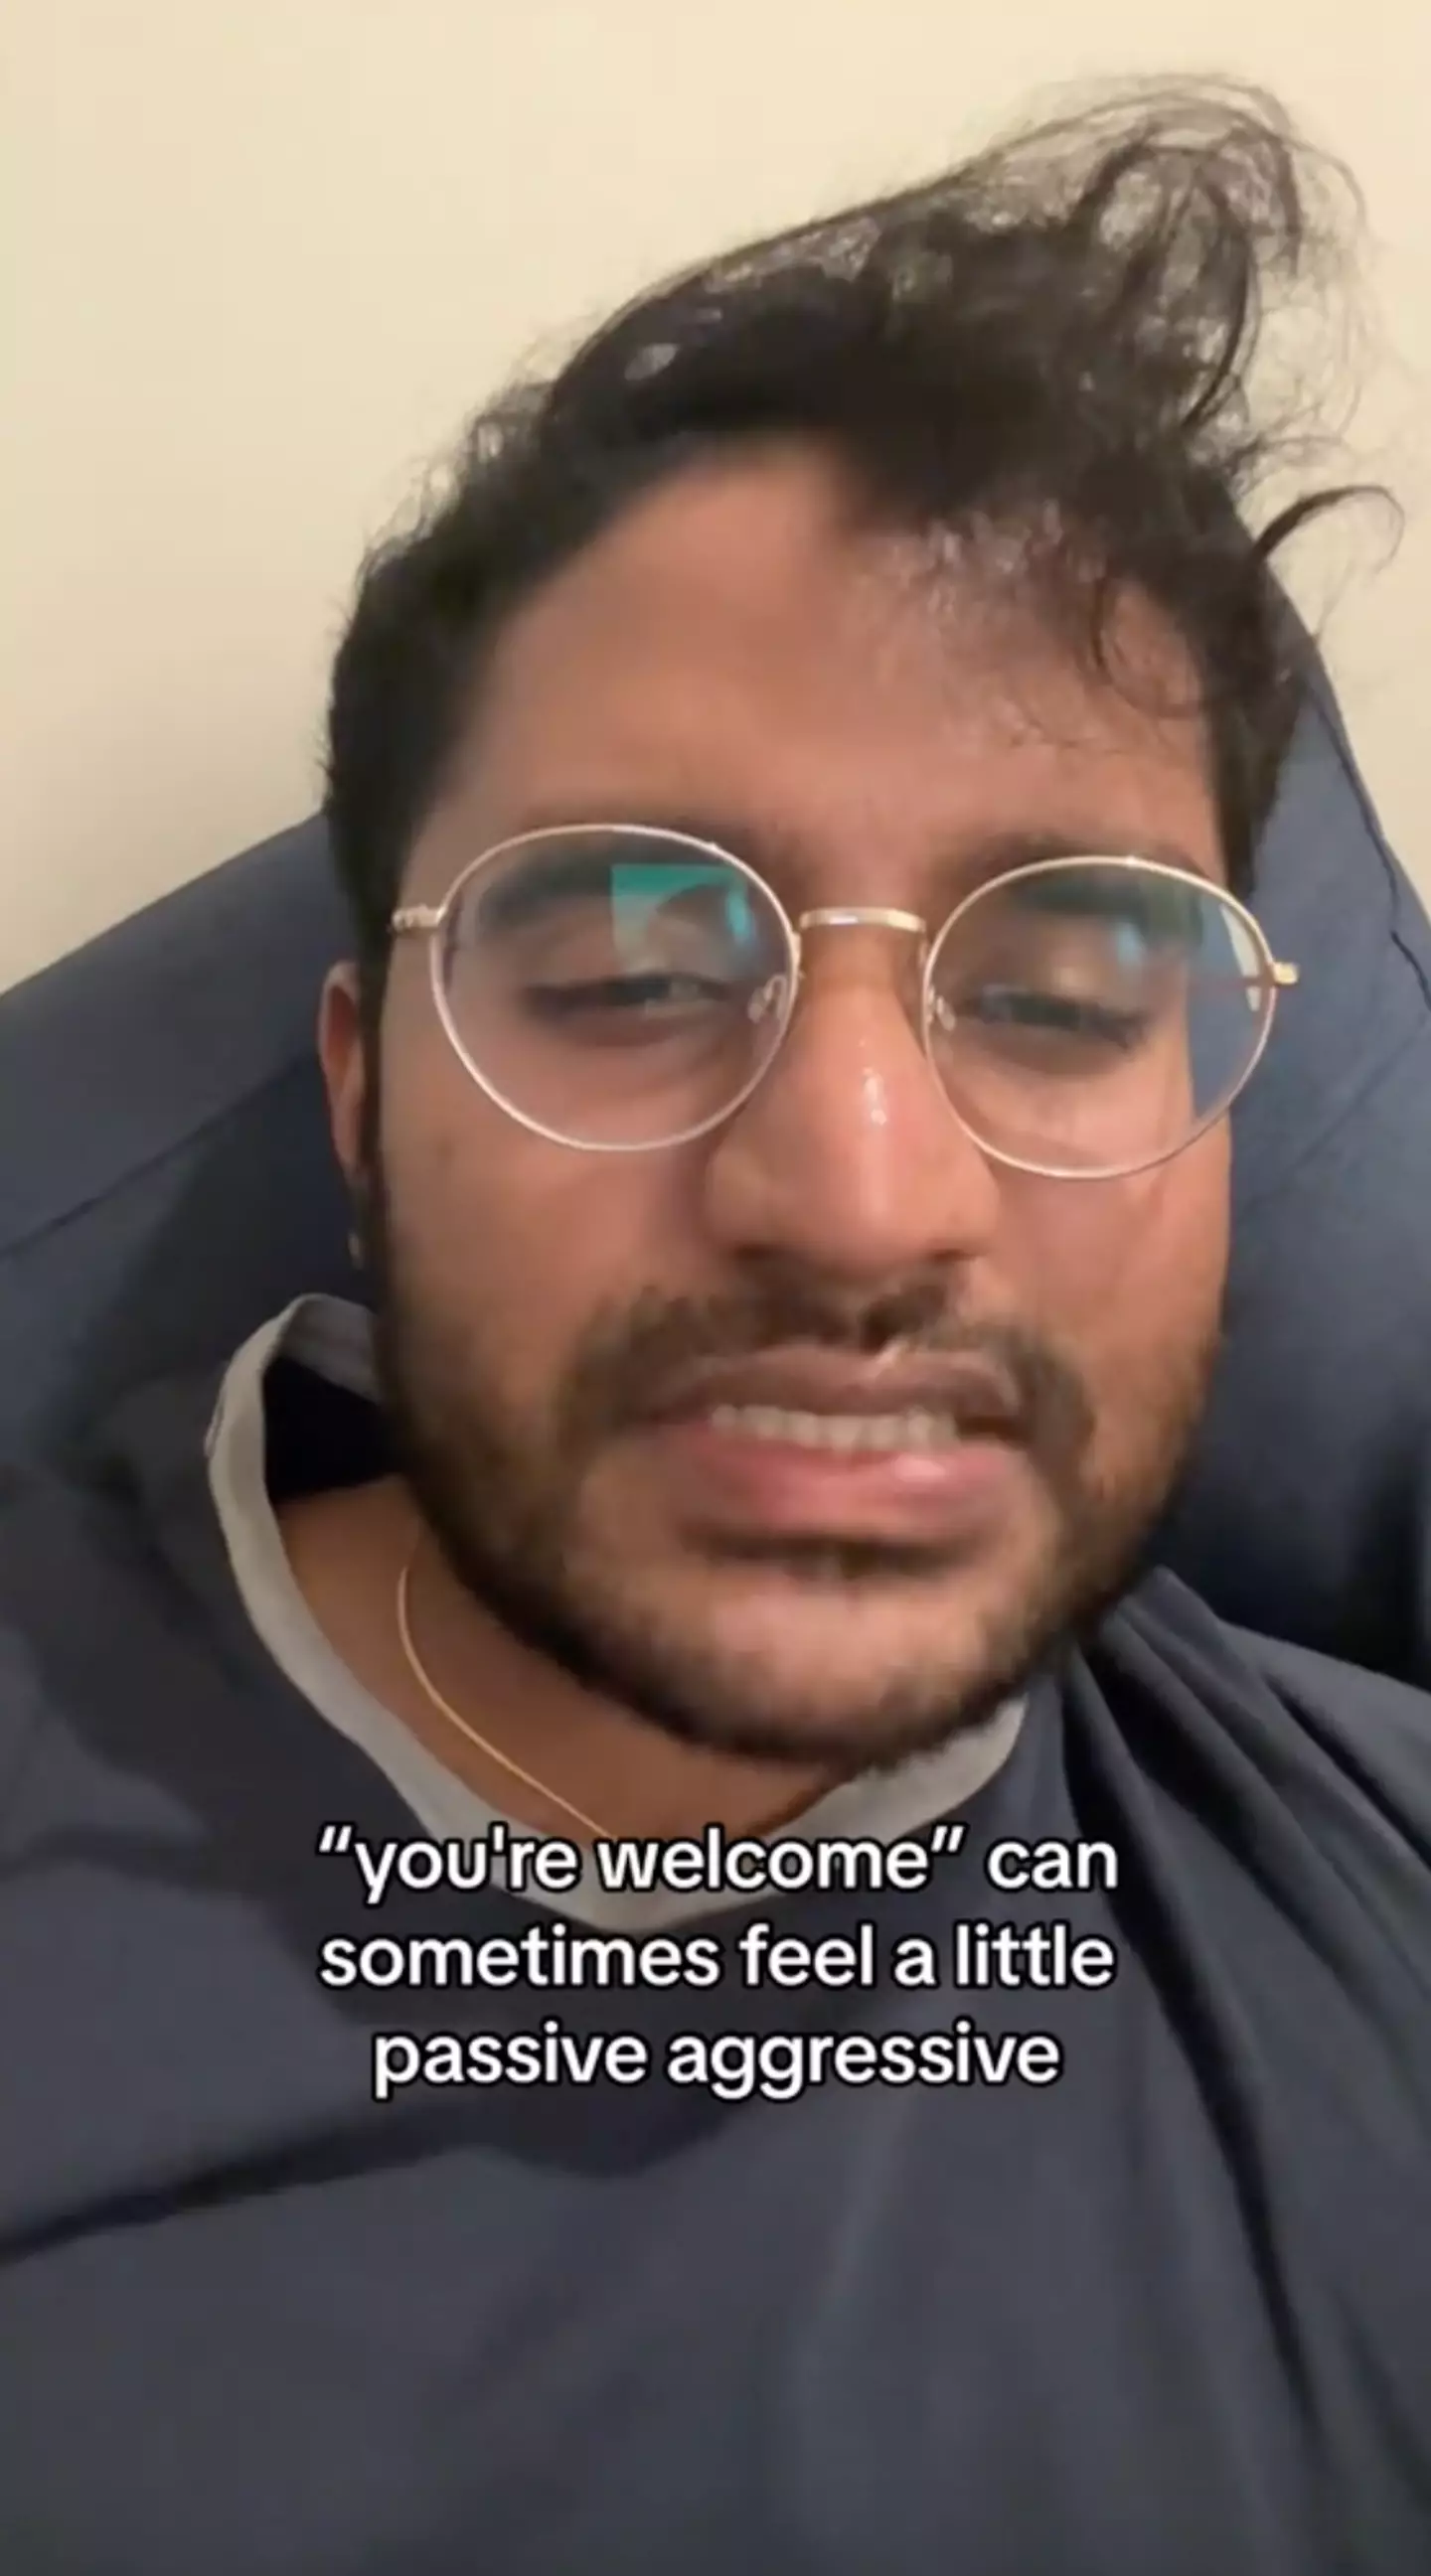 One TikTok explained how 'you're welcome' can come off as 'rude' or even 'passive-aggressive'.